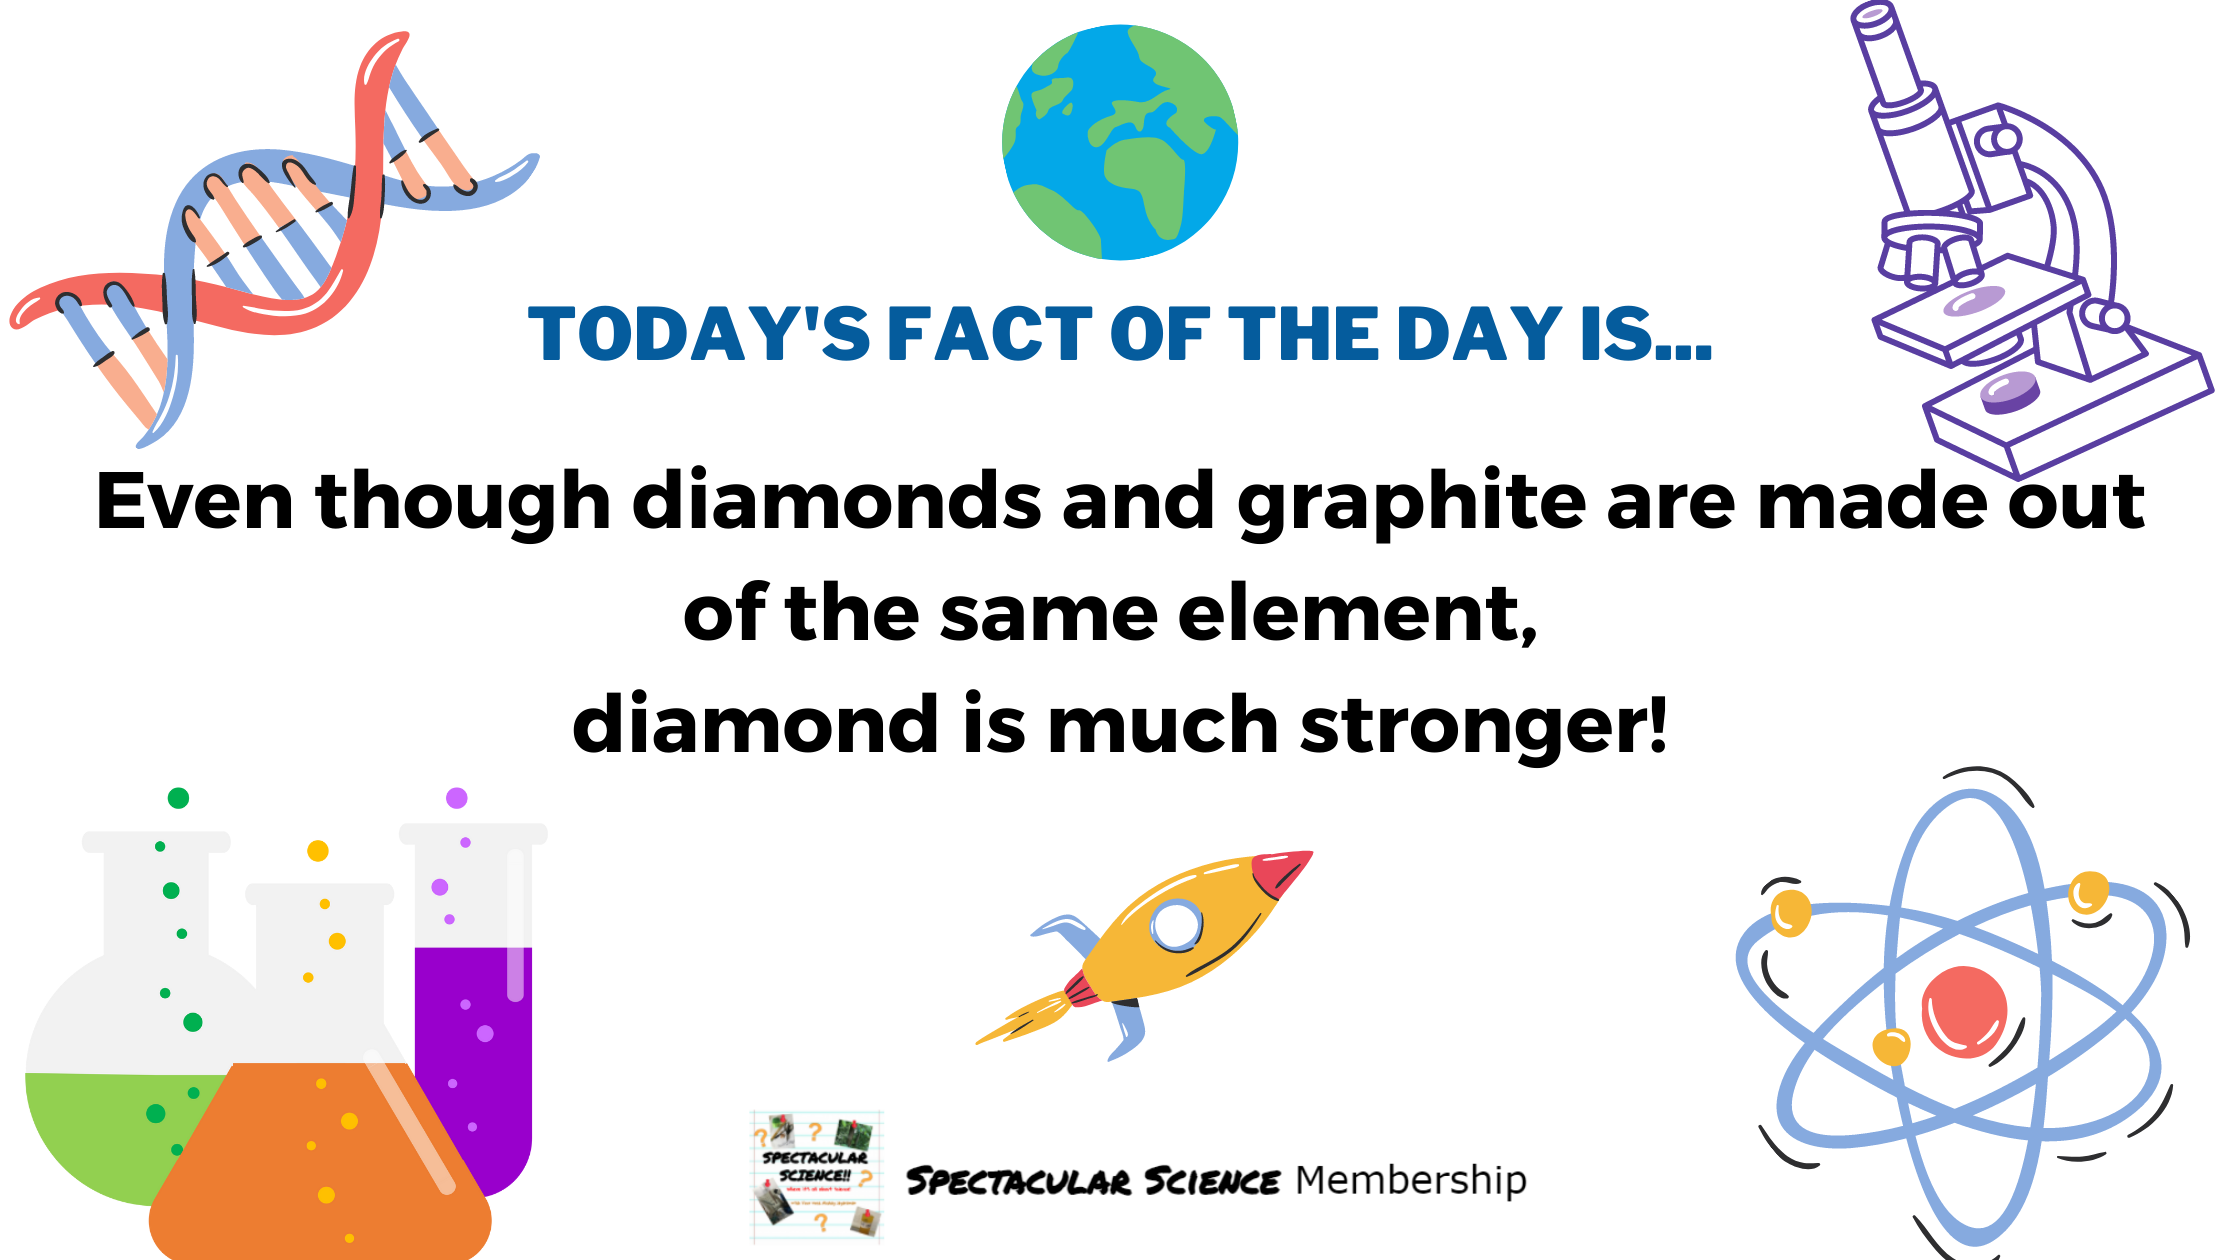 Fact of the Day Image Feb. 6th